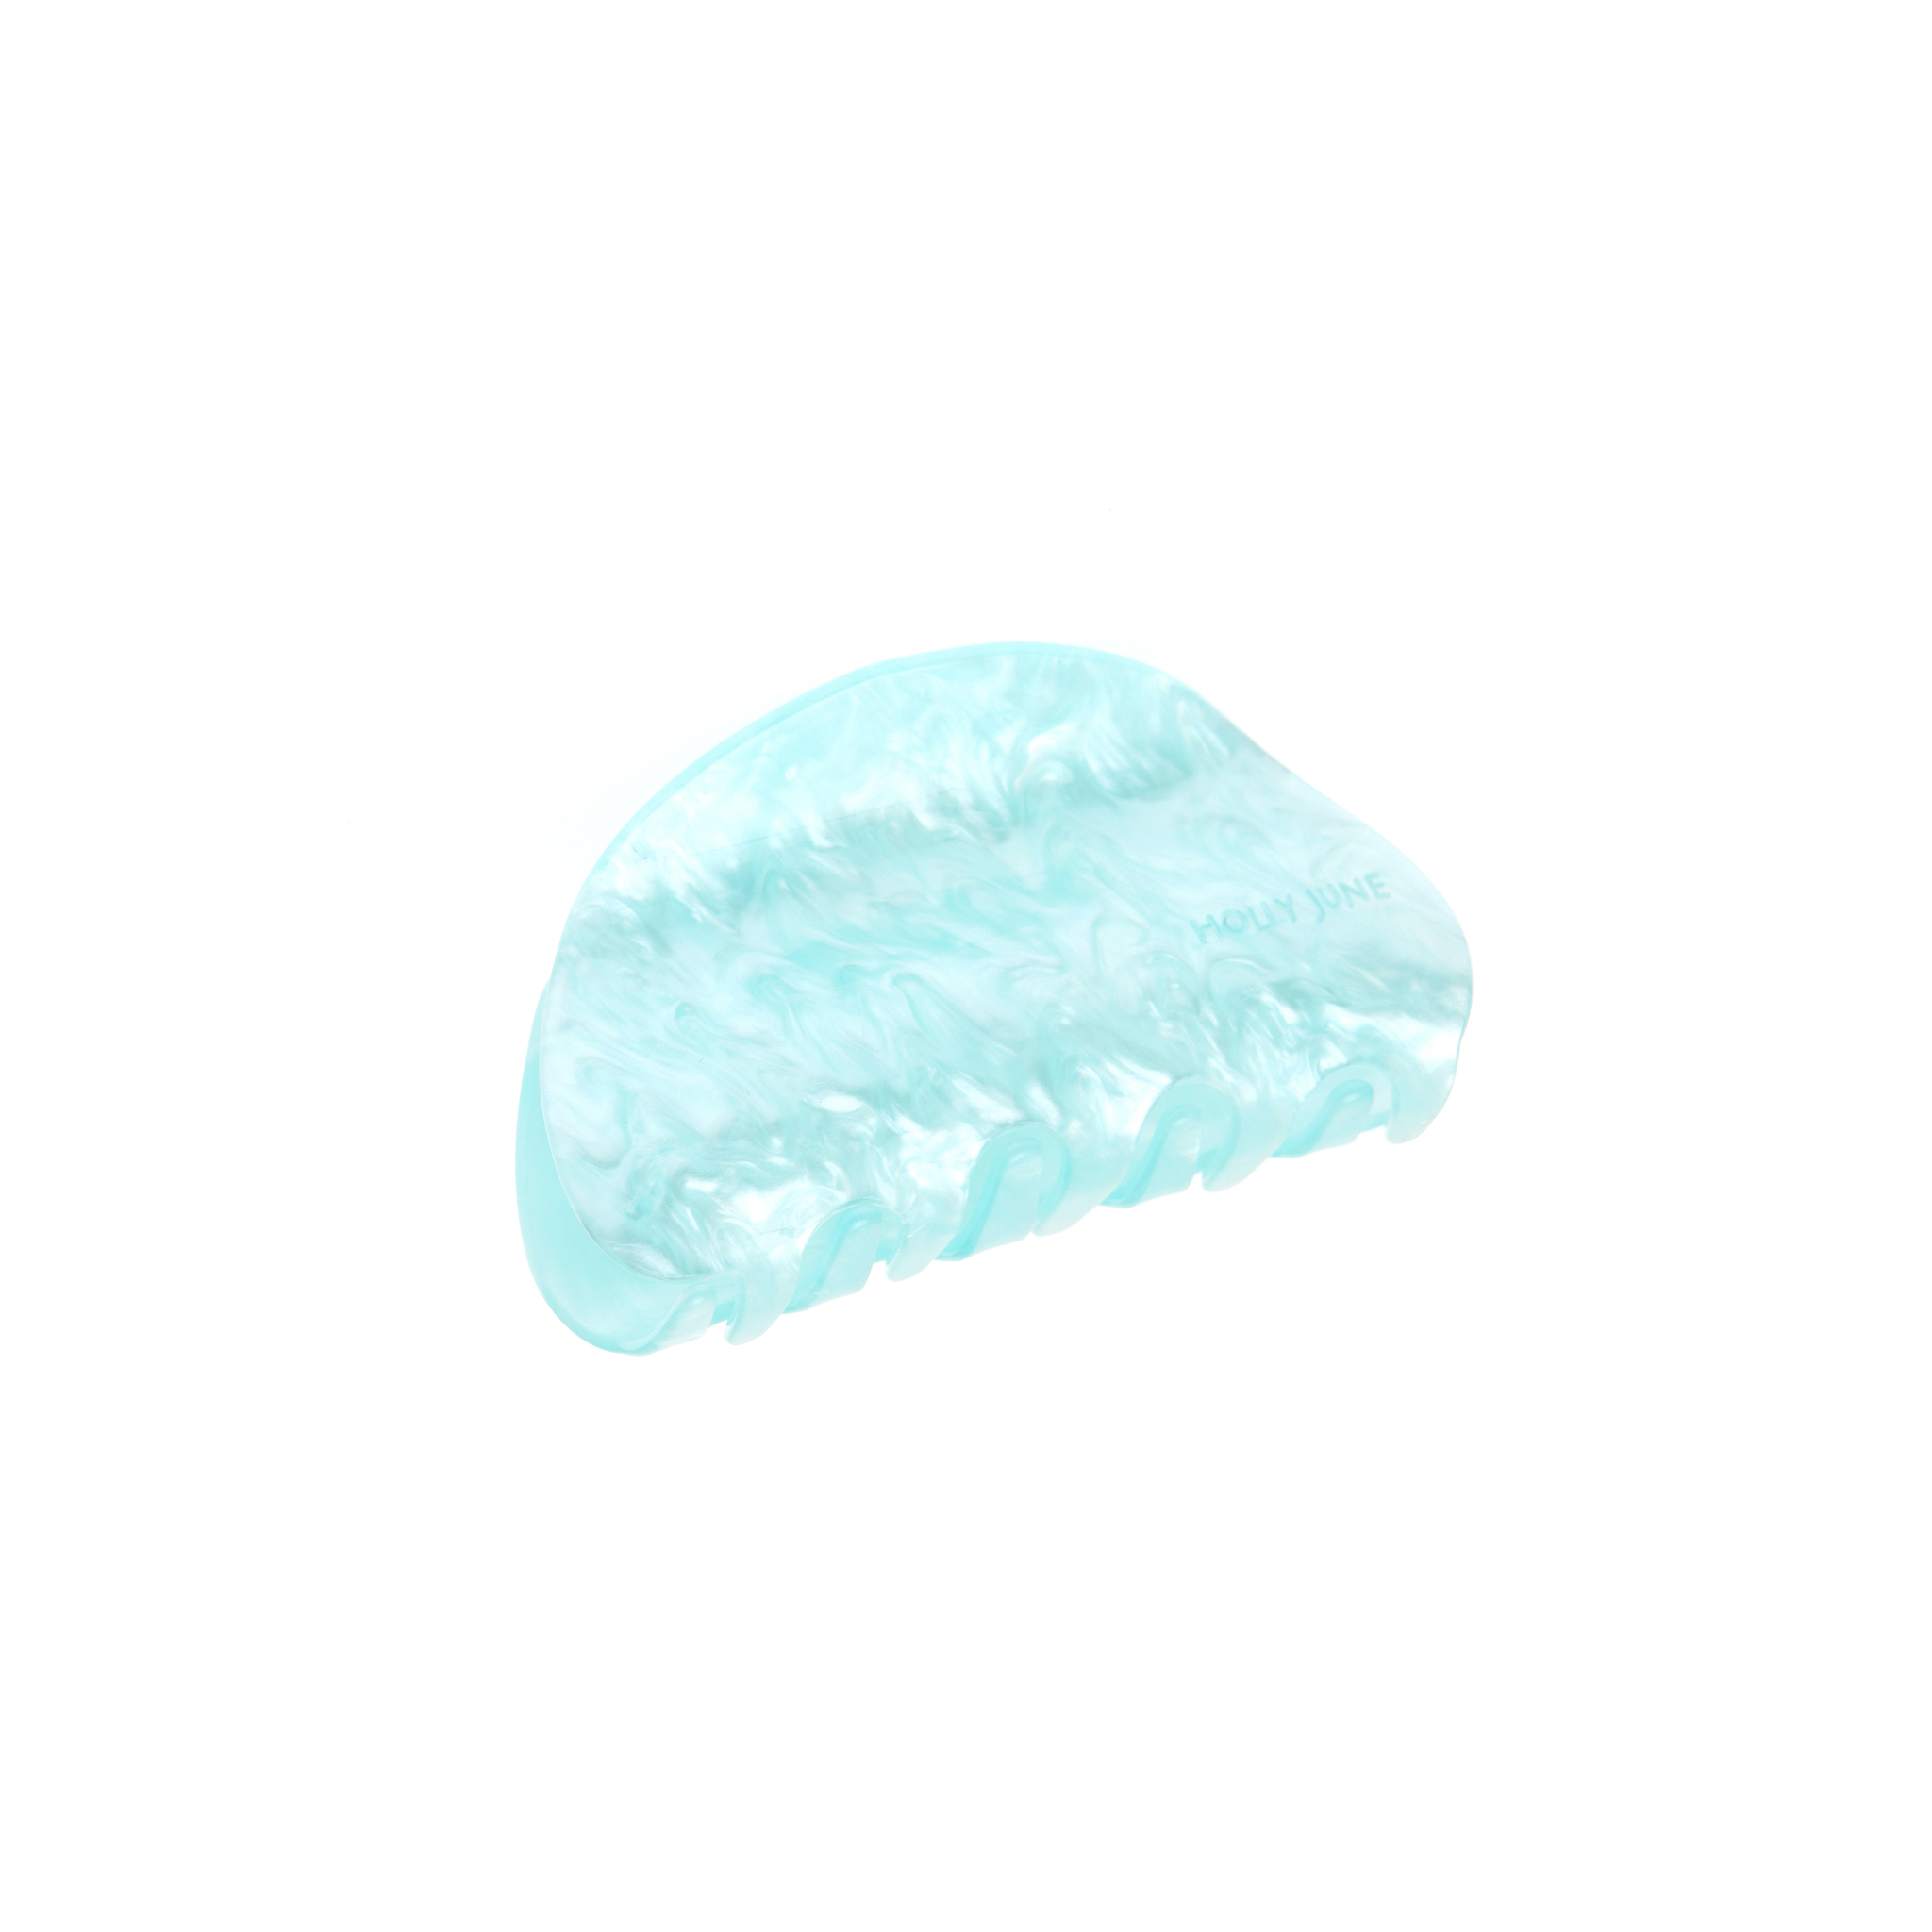 HOLLY JUNE Крабик Delicate Nacre Hair Claw – Blue holly june крабик cloudy hair claw – moonlight blue